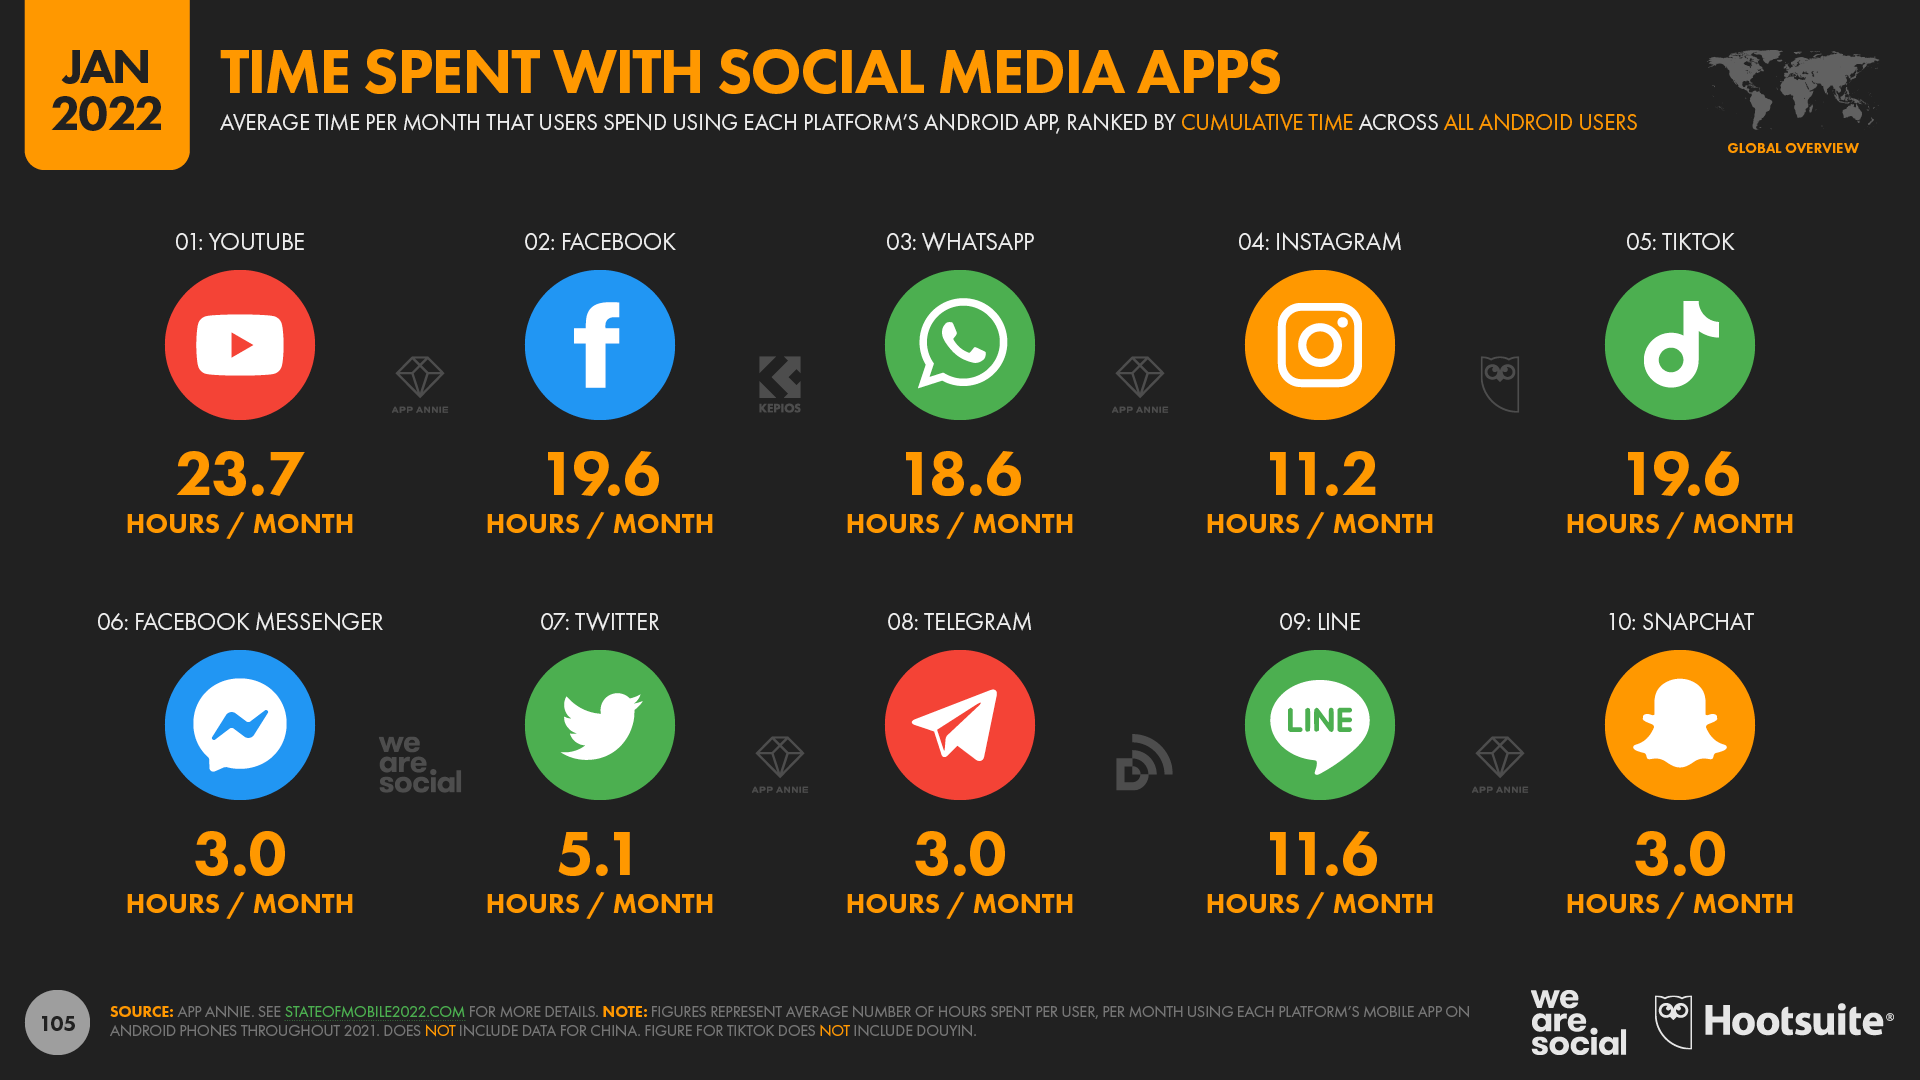 Data Showing Time Spent With Social Media Apps as of Jan 2022 With Various Metrics